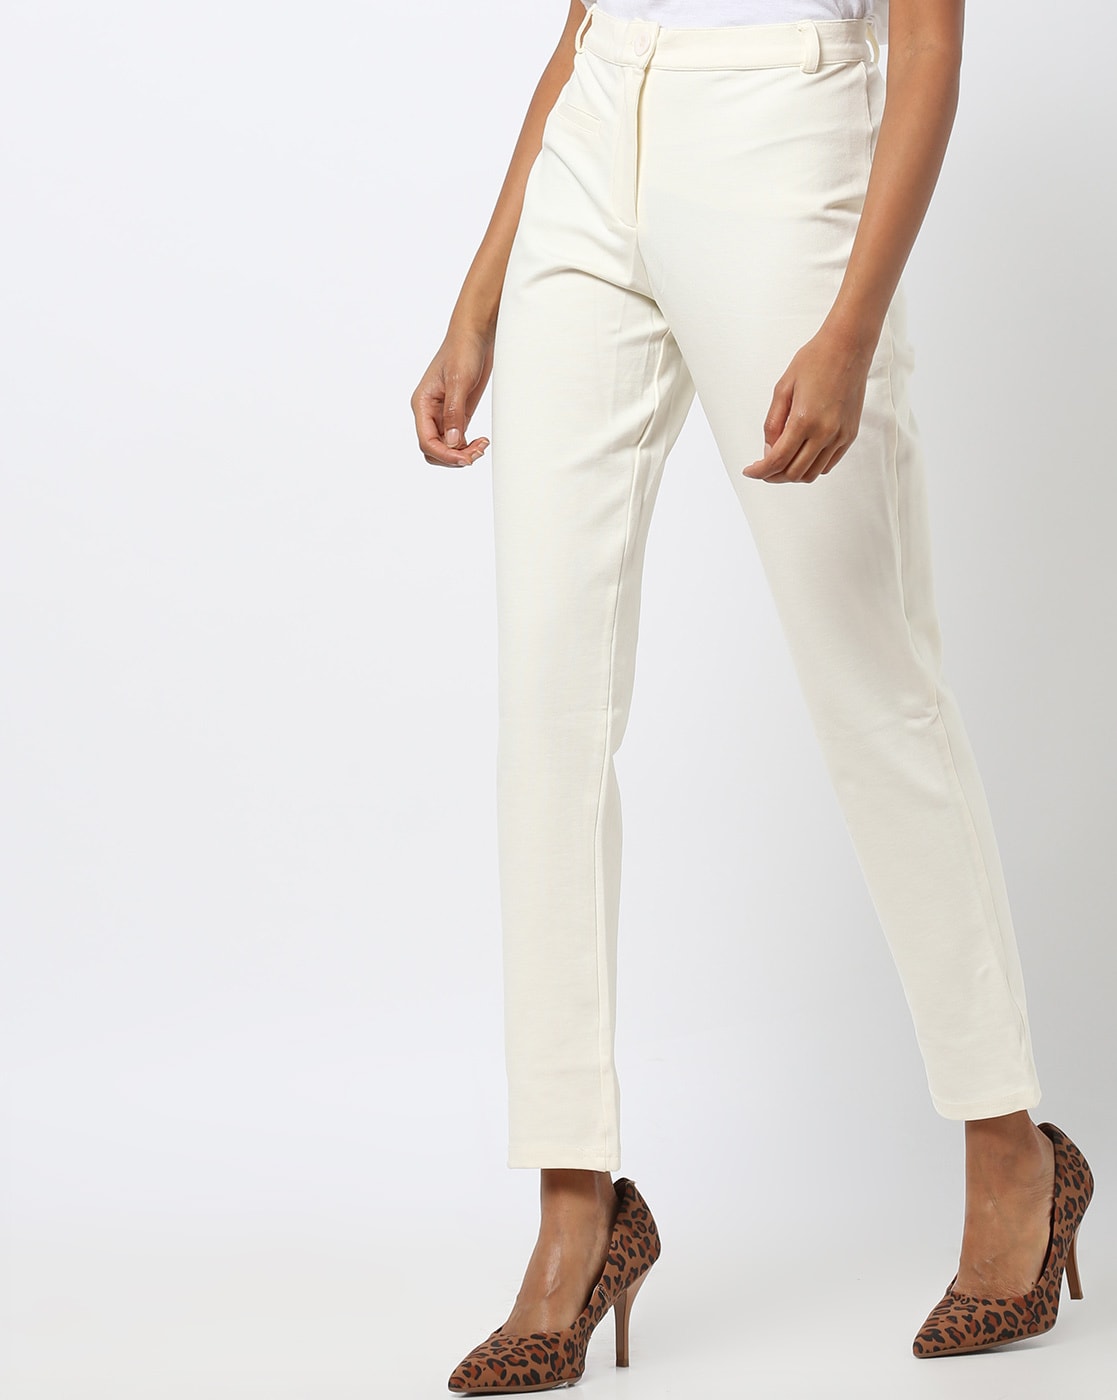 LEE TEX Women Regular Fit White Cotton Blend Trousers For Rs 399  80 OFF   Deals